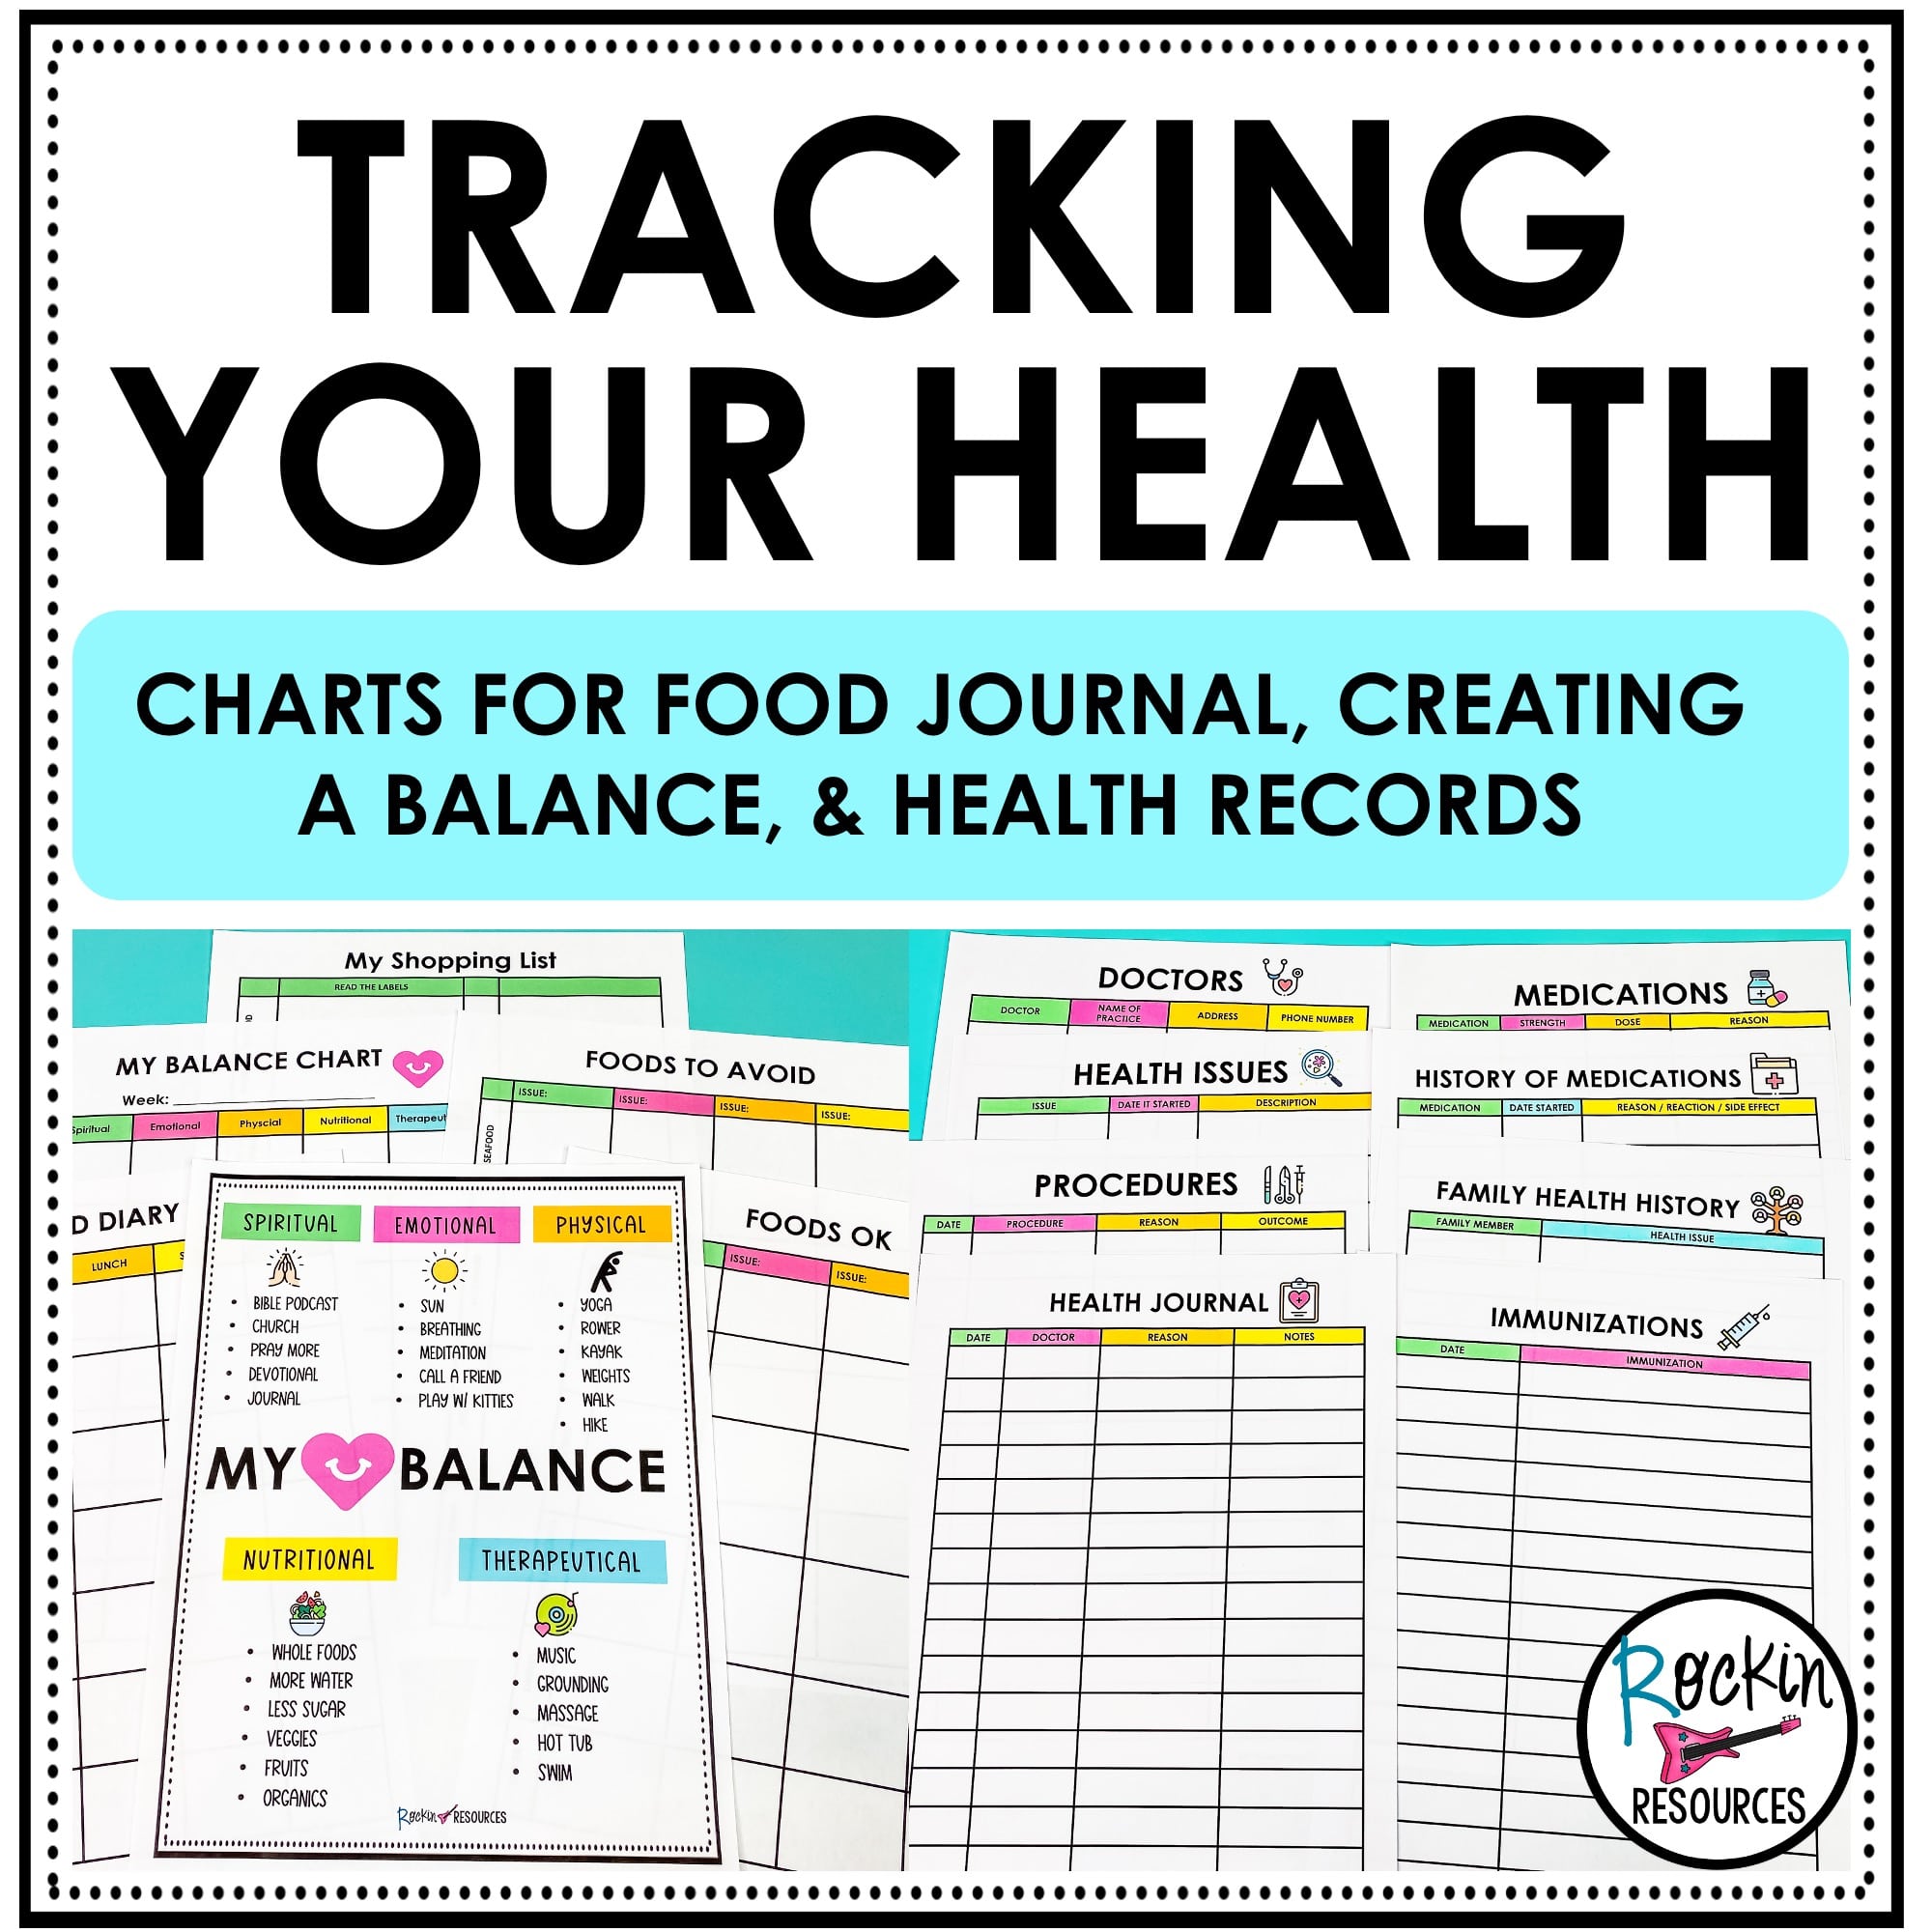 Charts for Tracking Health - Food Journal - Food Diary - Creating a Balance  - Rockin Resources